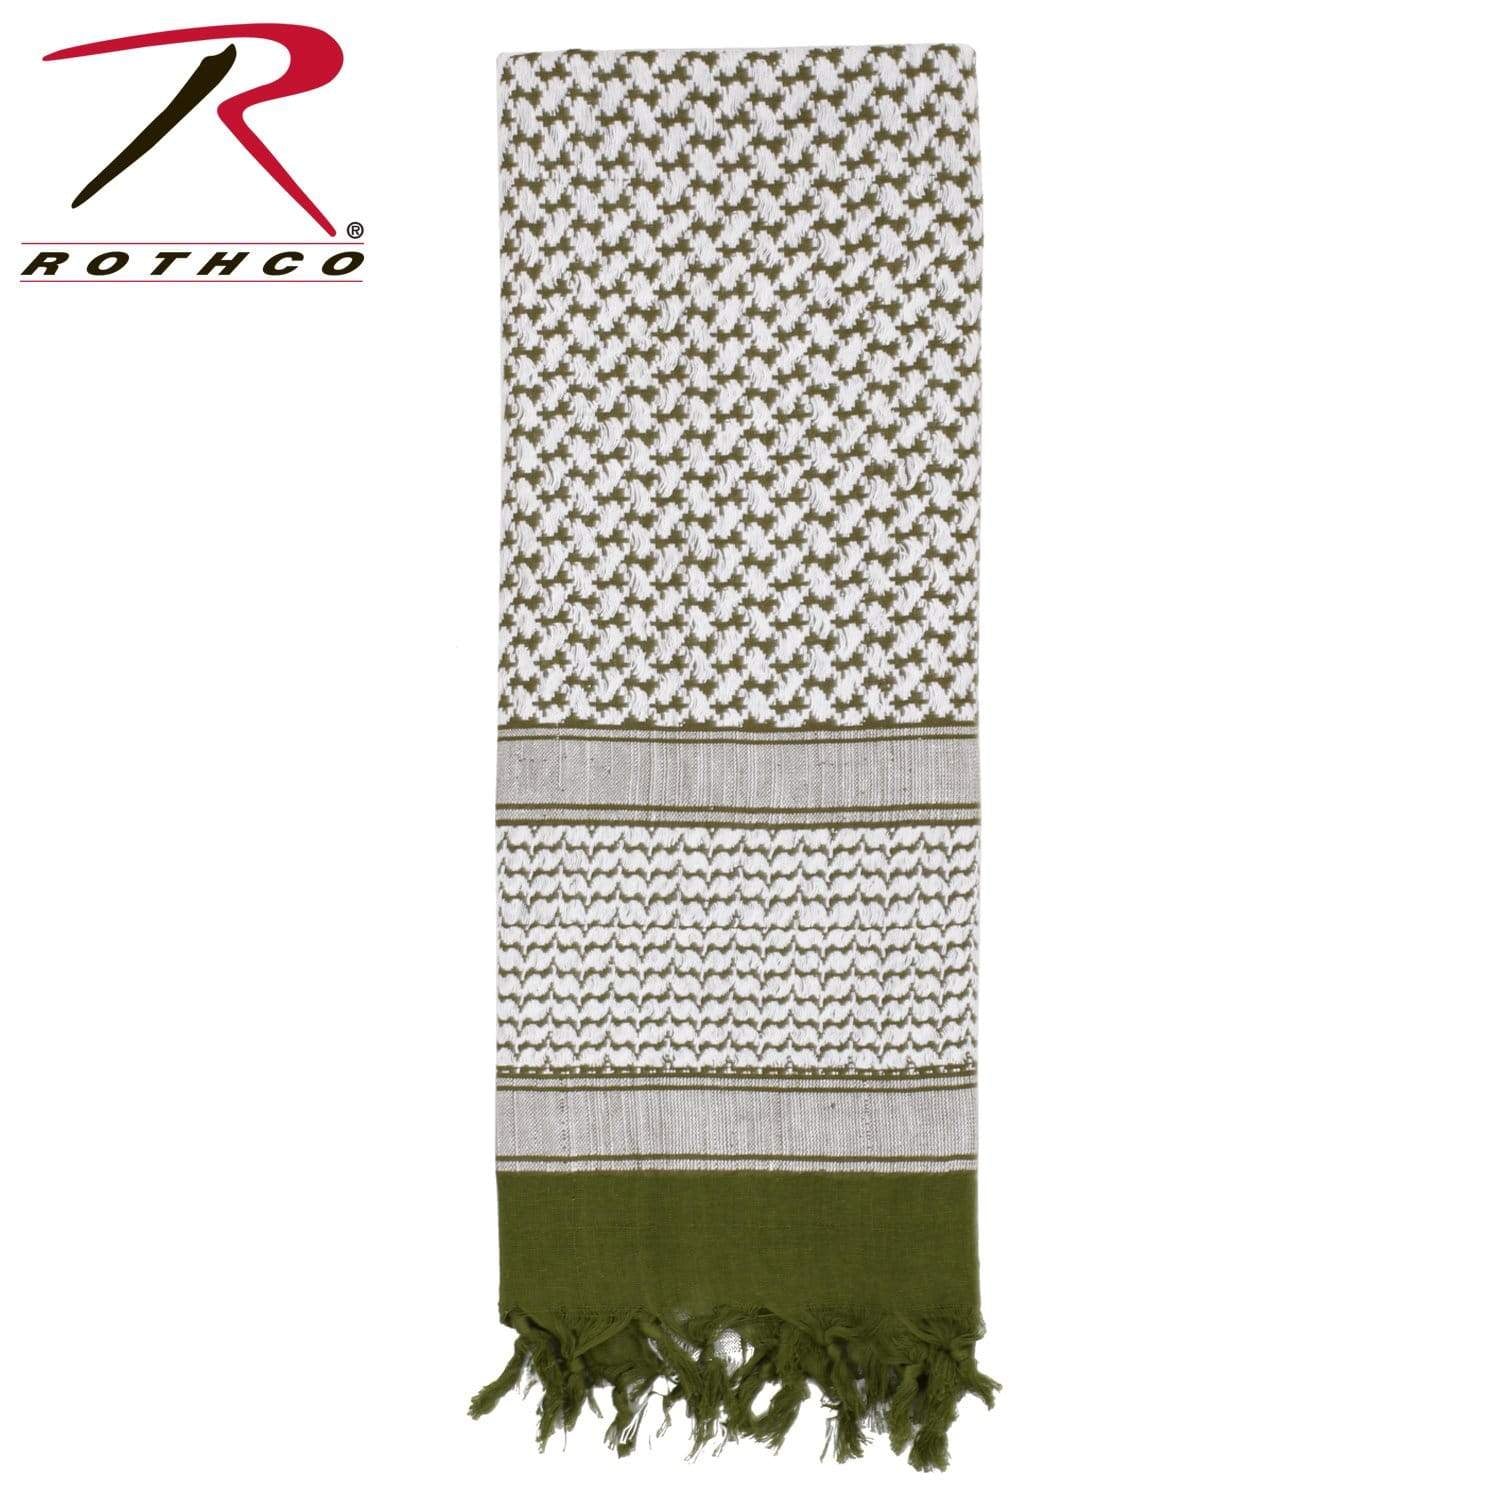 Rothco Shemagh Tactical Desert Keffiyeh Scarf - Olive Drab / White - Eminent Paintball And Airsoft